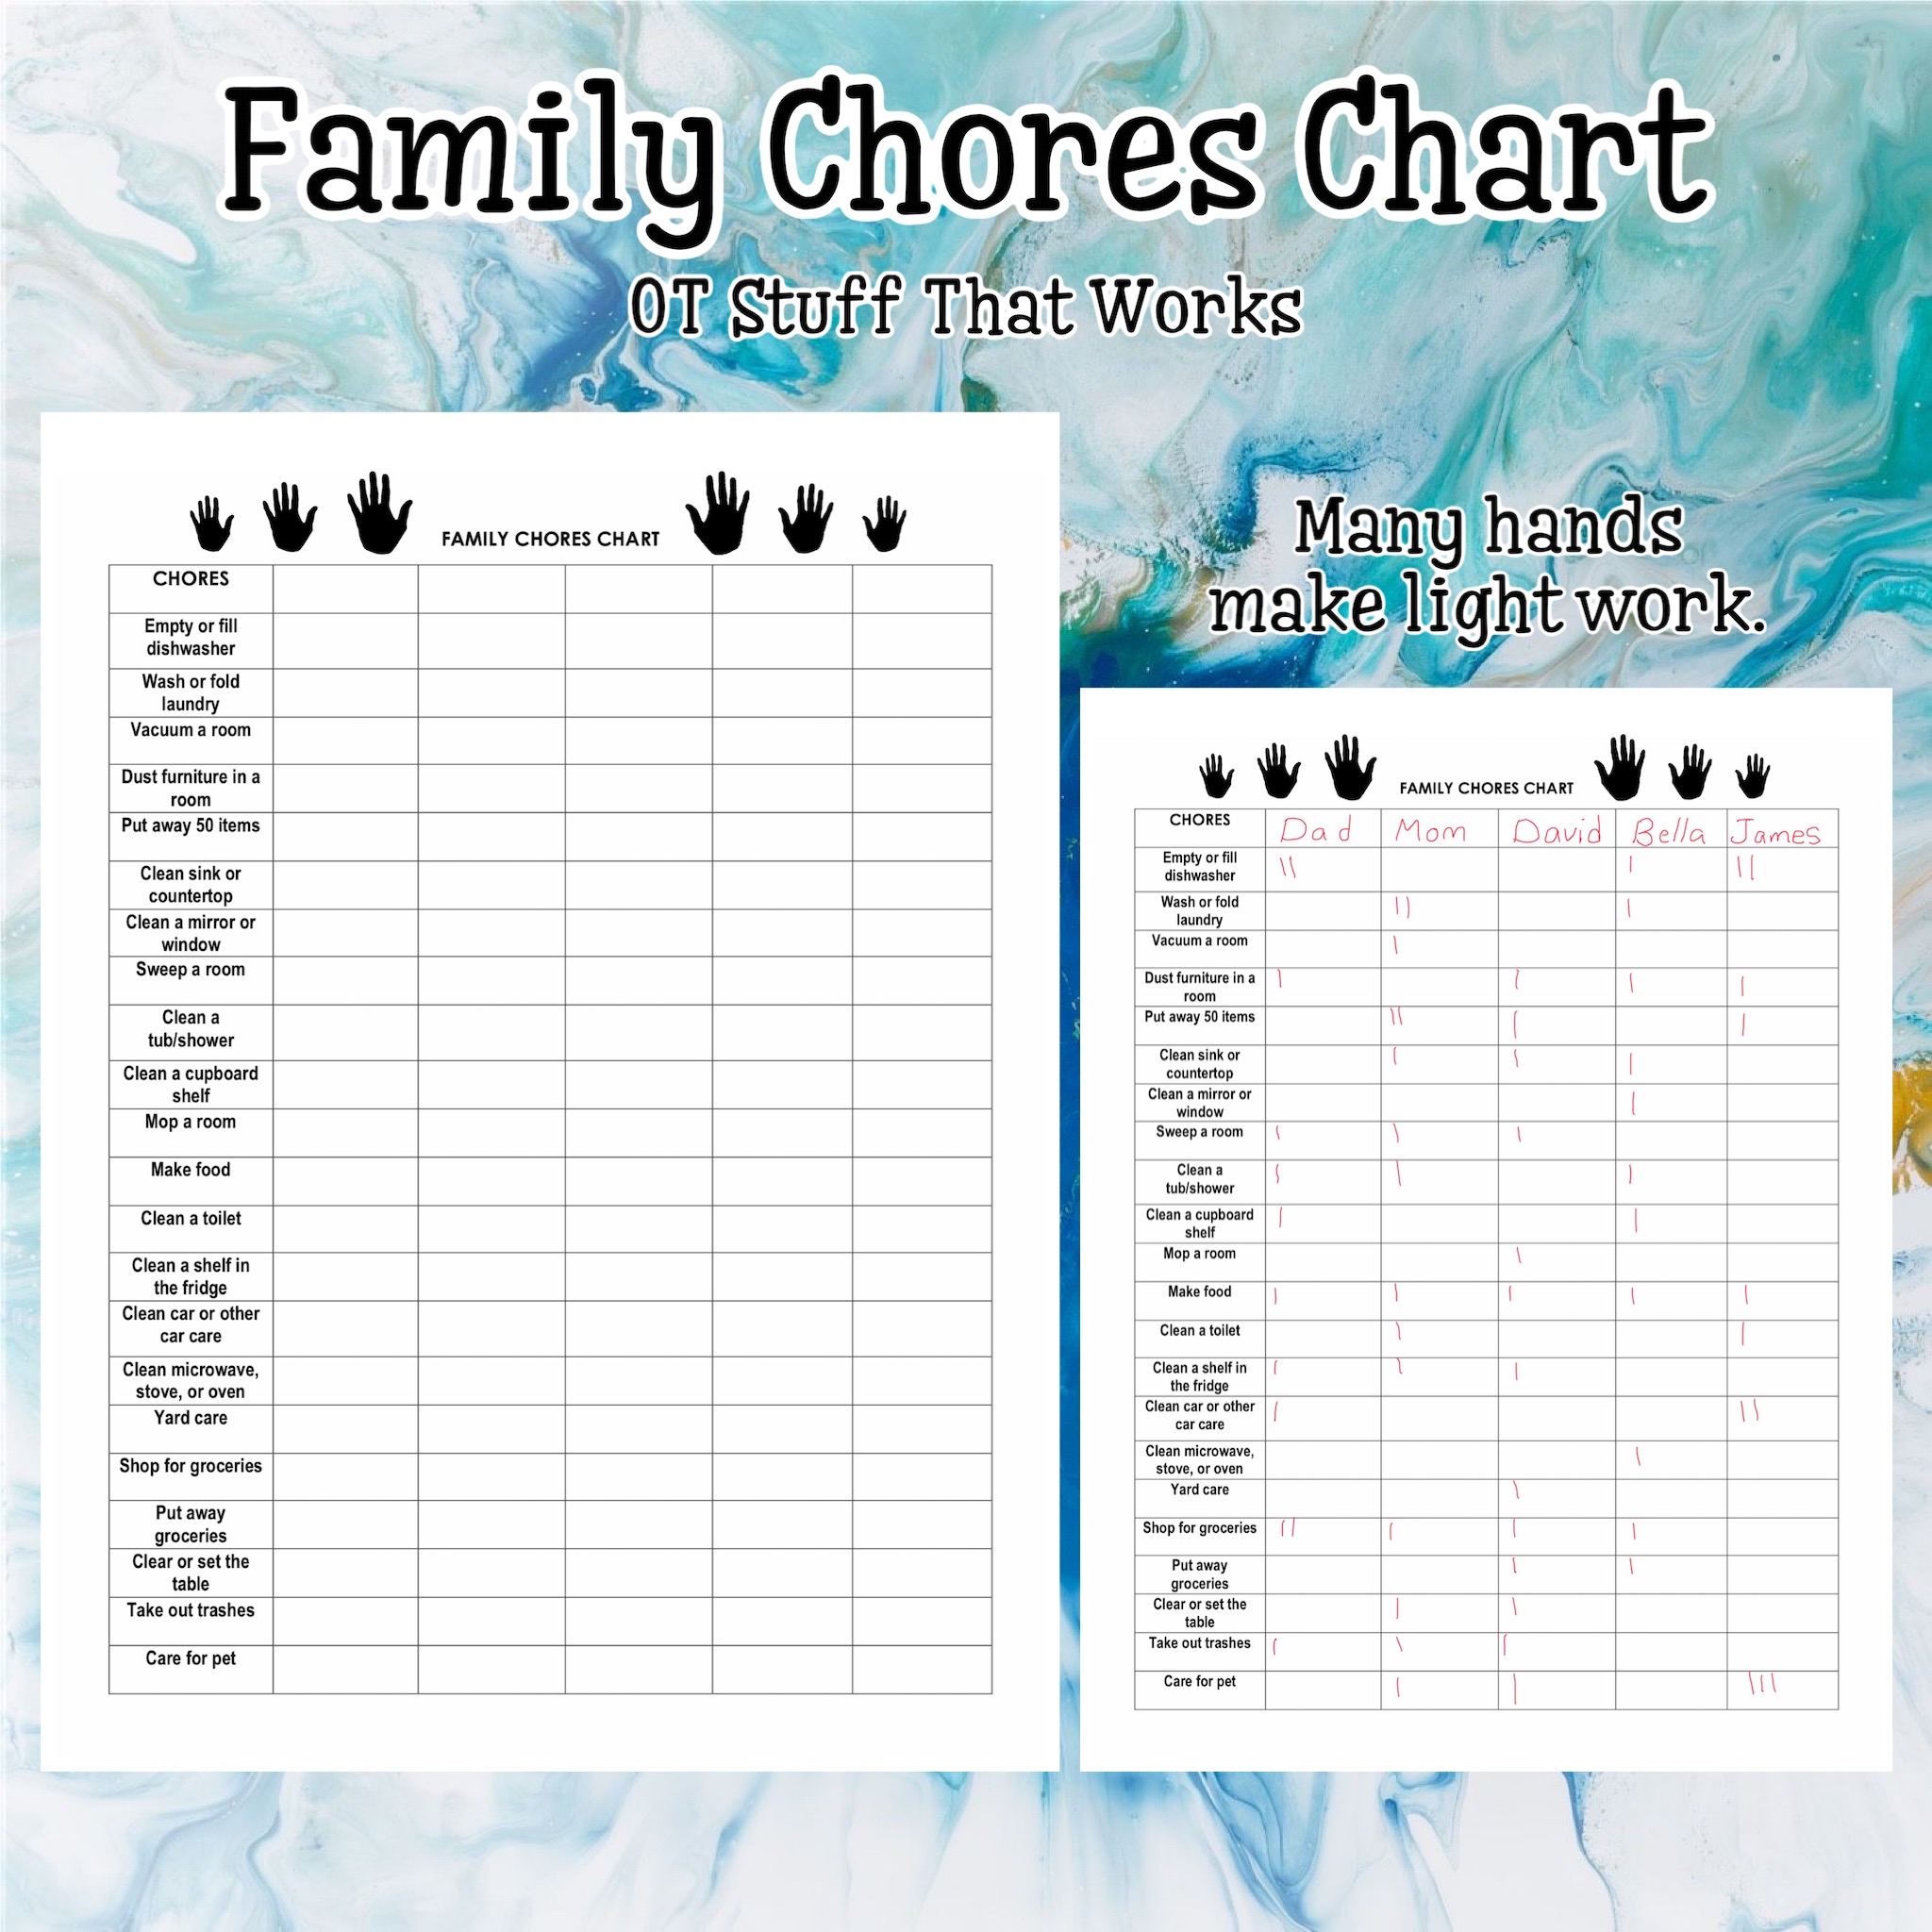 Family Chores Chart's featured image